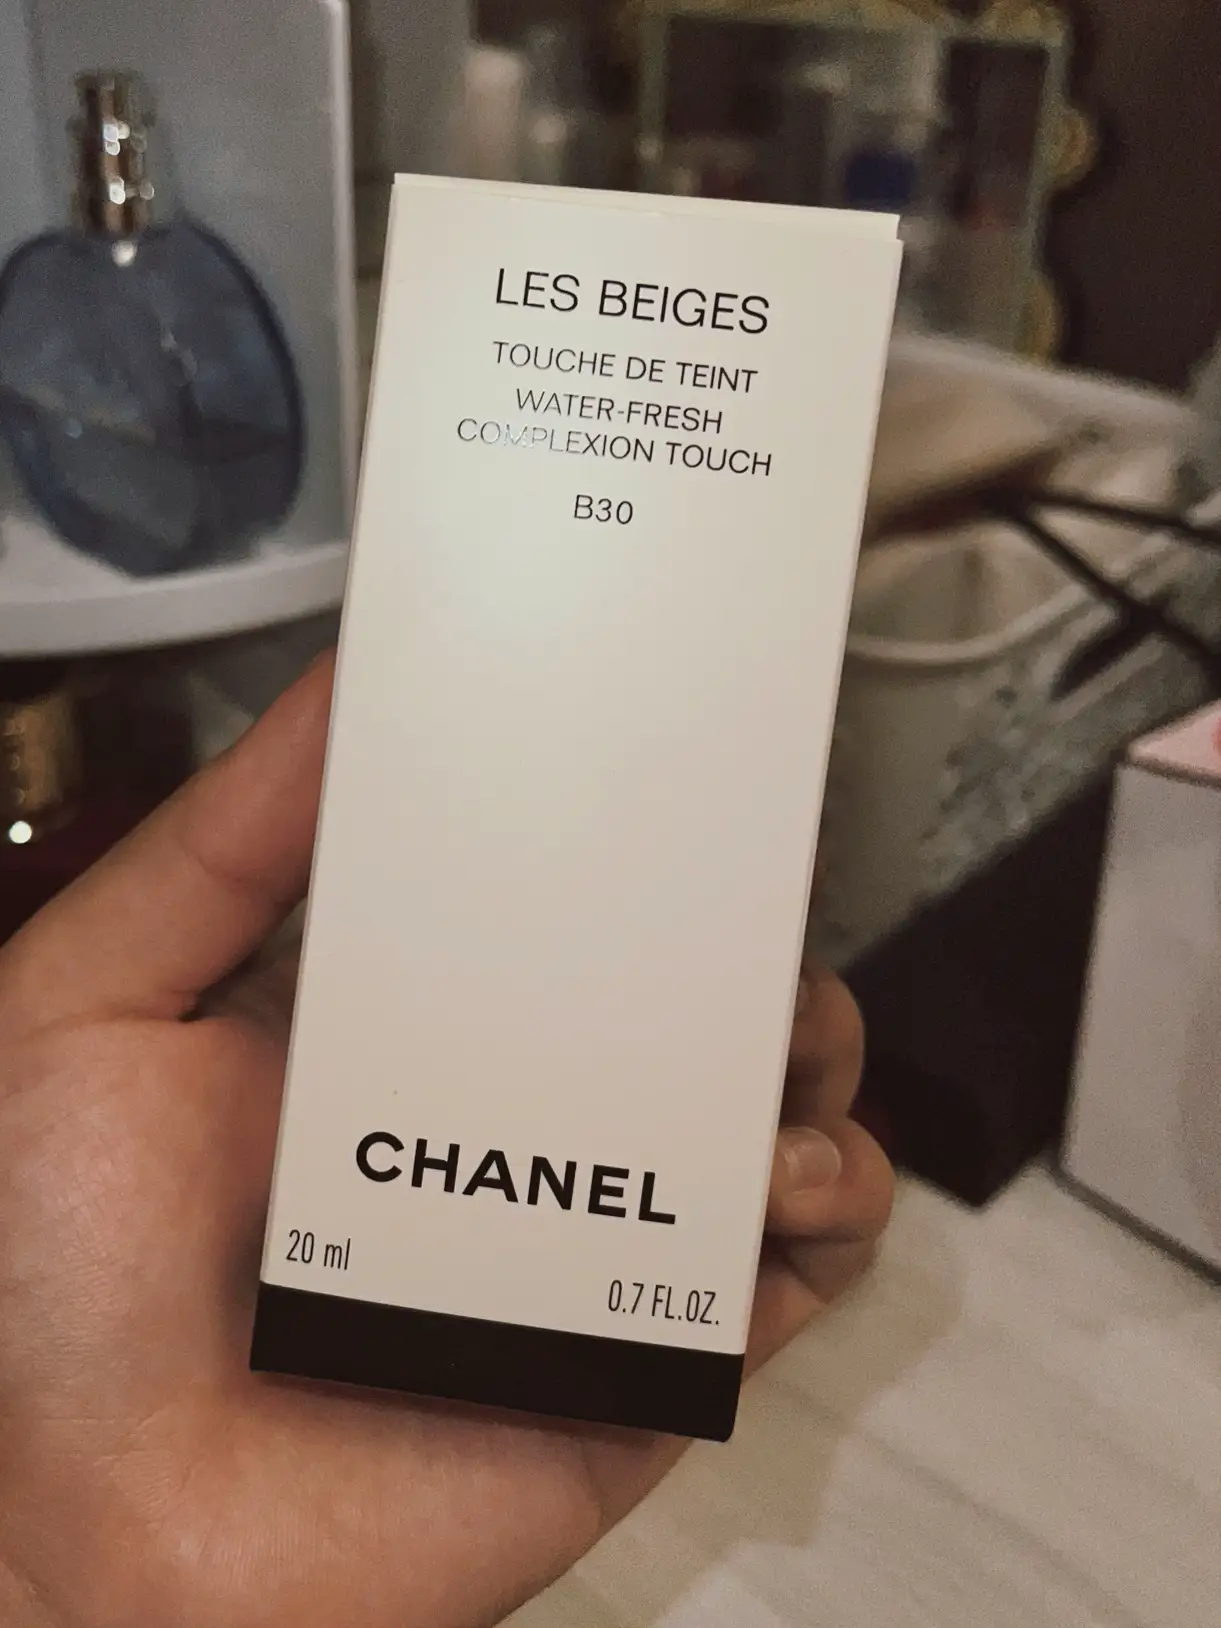 Trying the Famous Chanel skin tint